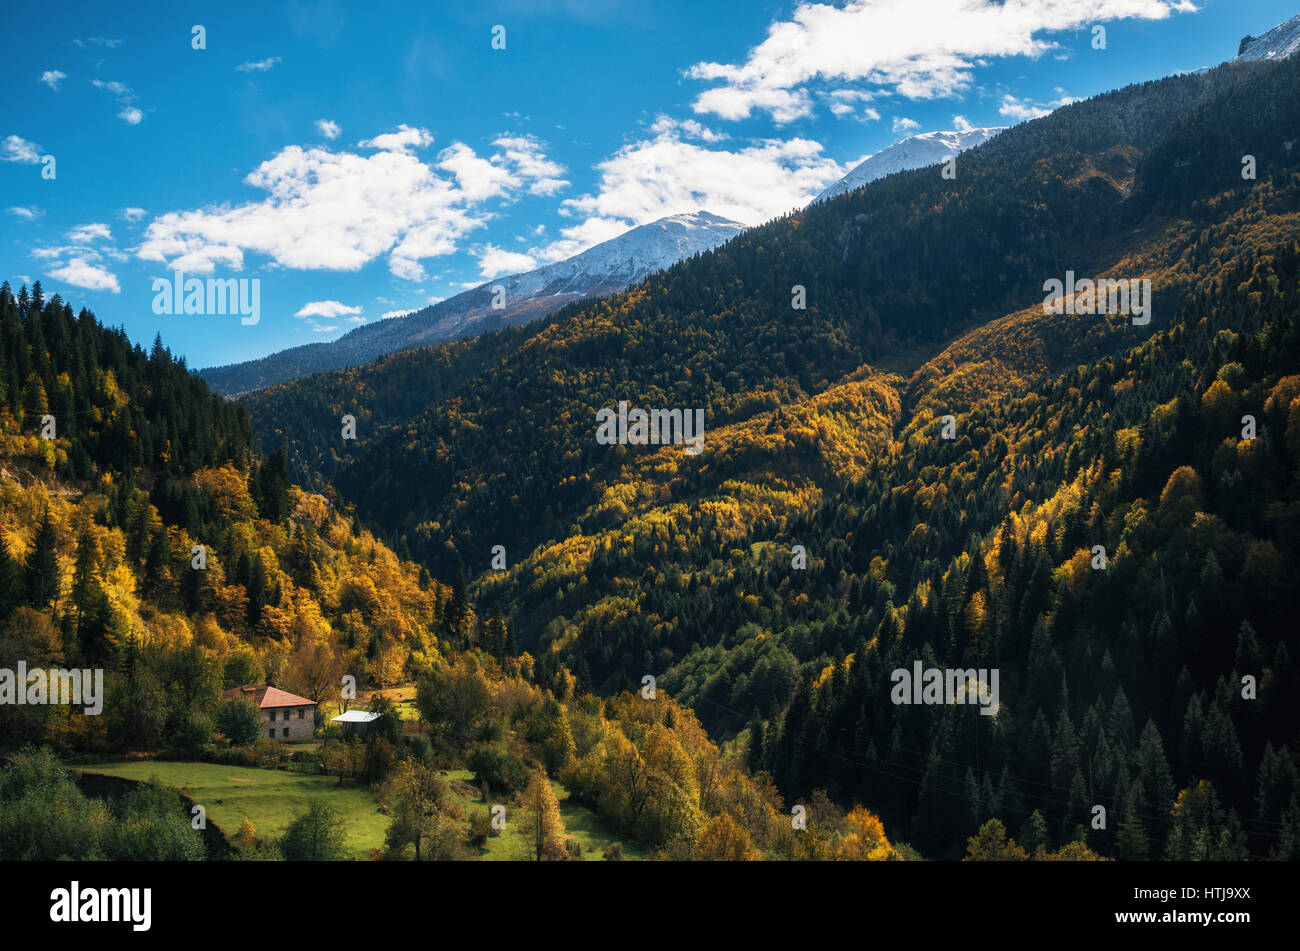 Colorful autumn landscape in the mountain village. A lonely house among the mountains and the colorful forest. Sunny morning in Svaneti. Georgia Stock Photo